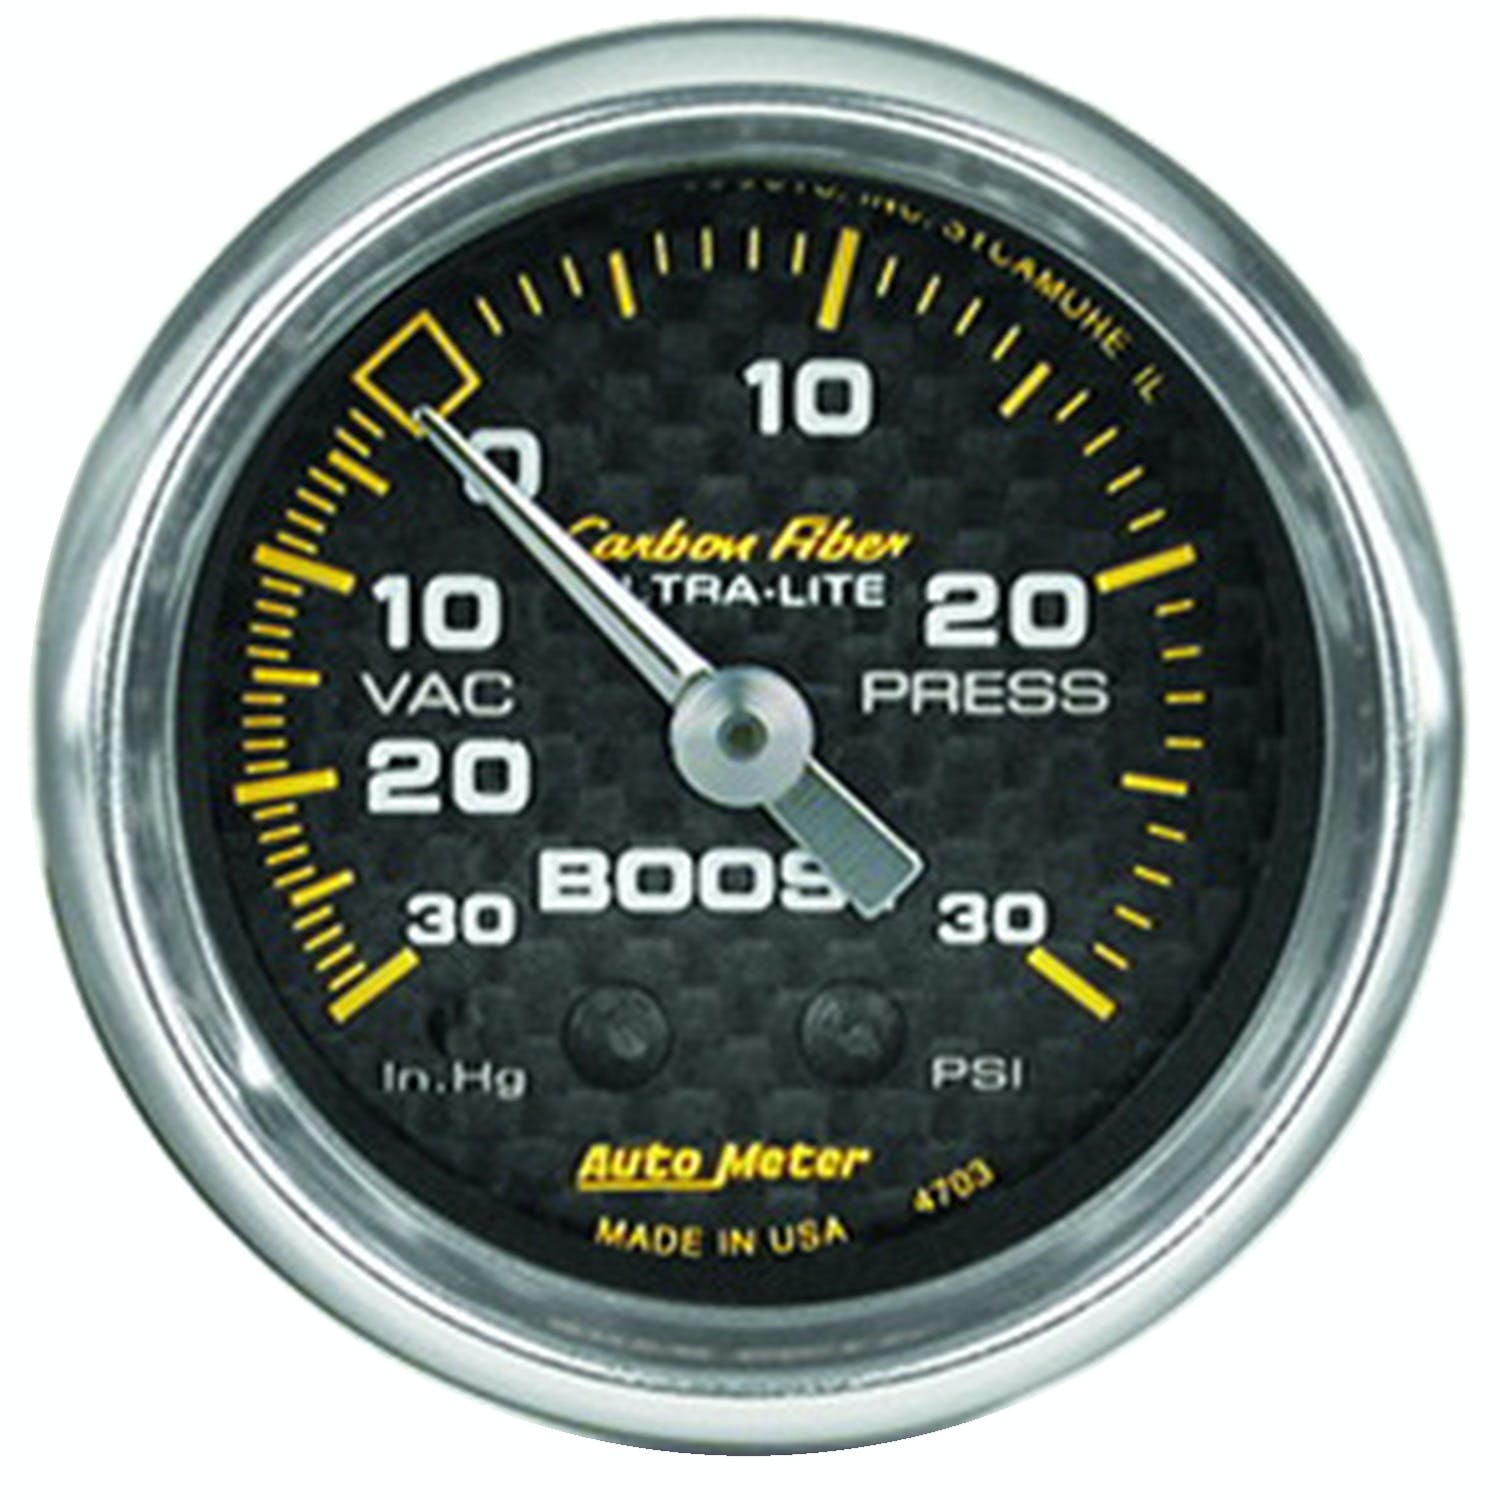 AutoMeter Products 4703 Boost/Vac 30 In. Hg/30 PSI